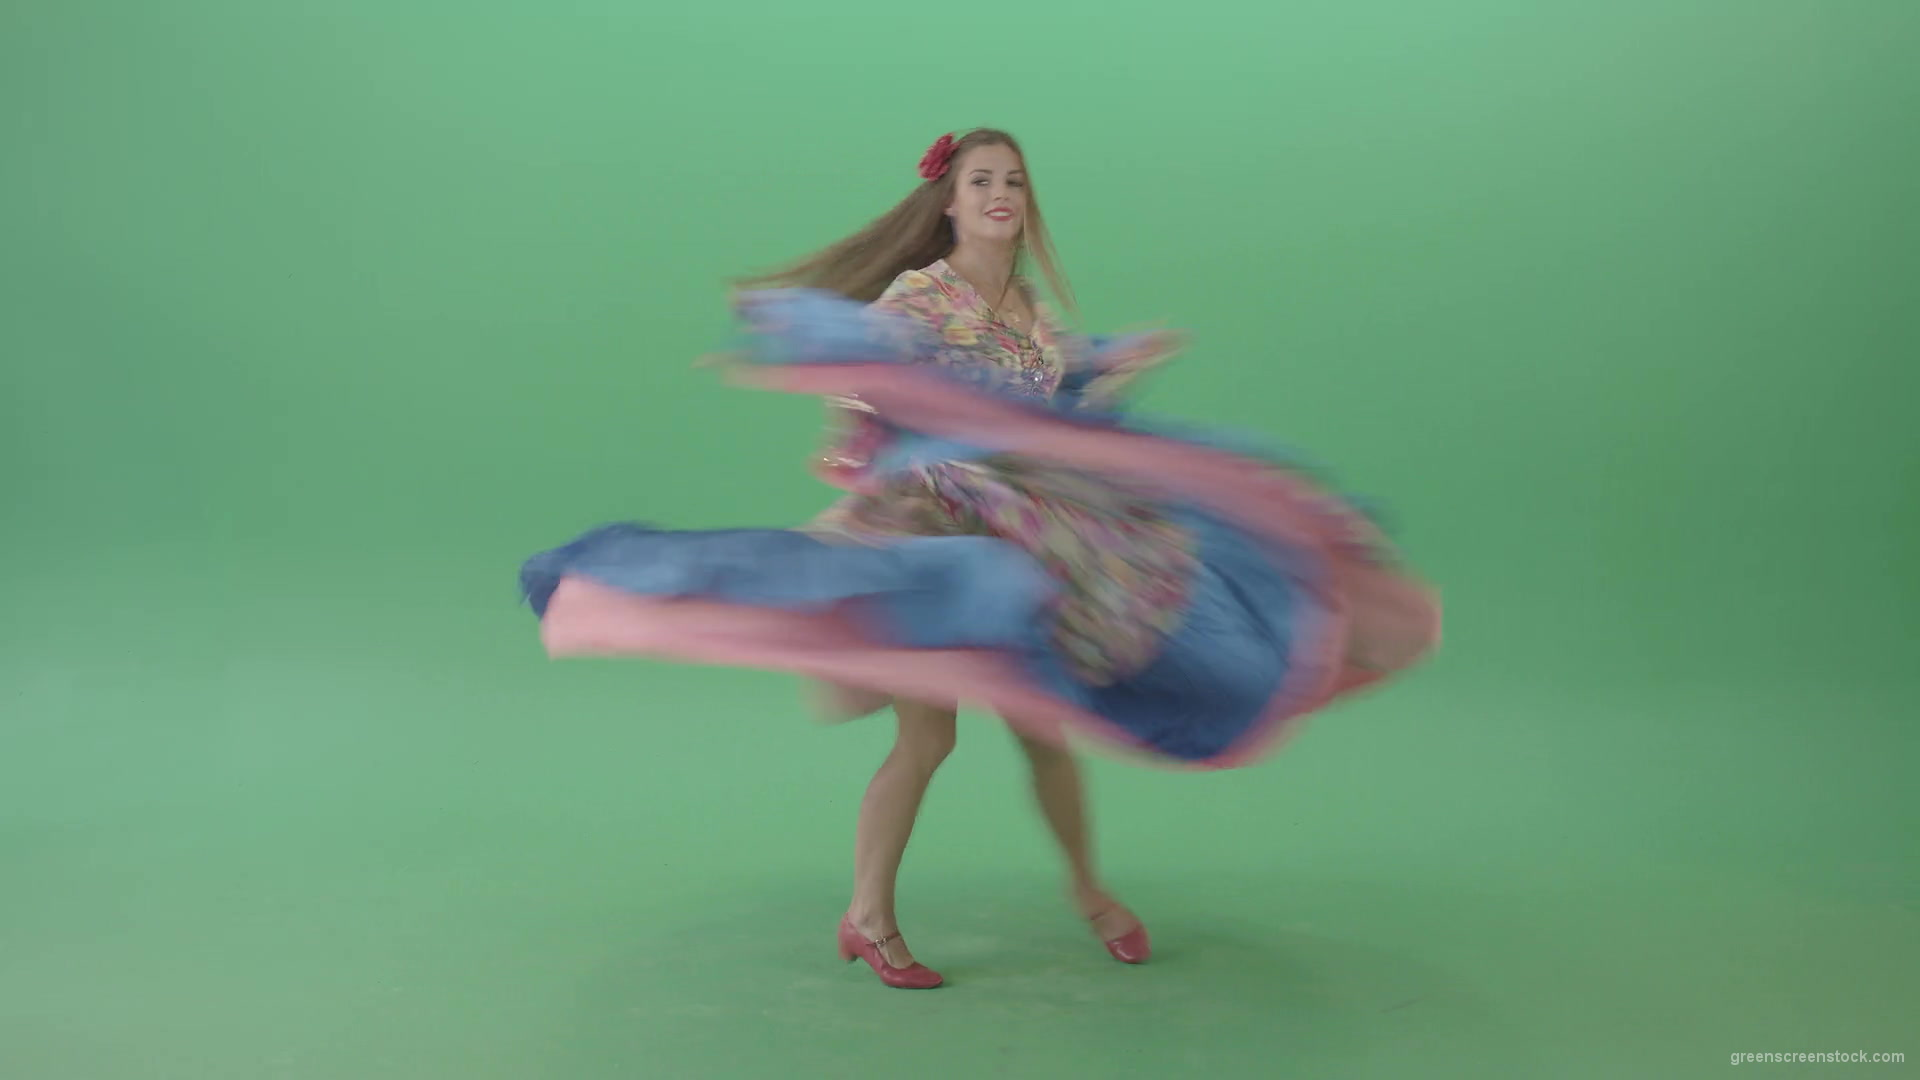 vj video background Balkan-Gipsy-Girl-spinning-and-dance-isolated-on-Green-Screen-4K-Video-Footage-1920_003